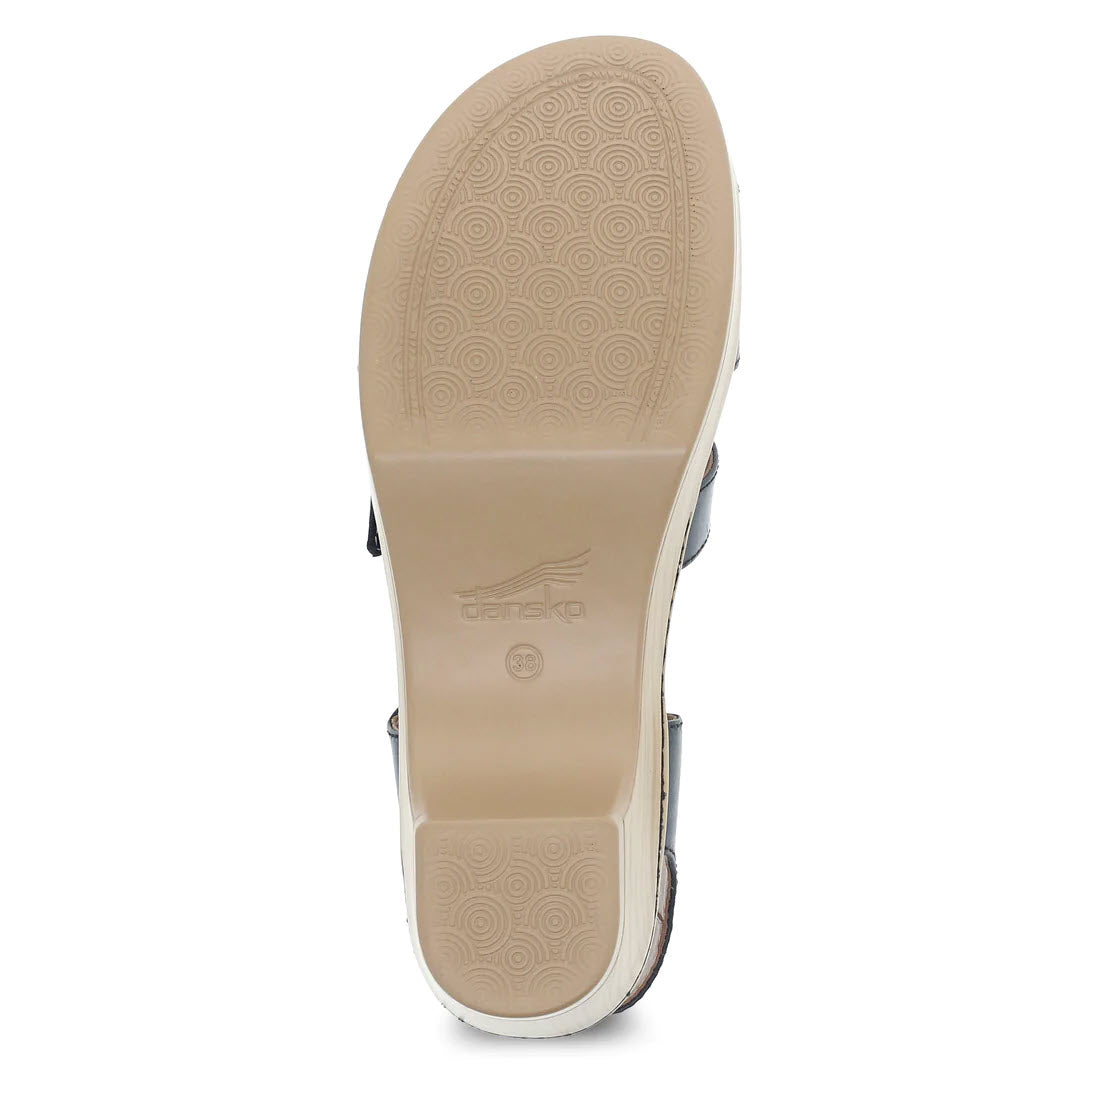 Sole of a sandal with tan rubber tread featuring circular patterns and the brand logo &quot;Dansko&quot; embossed in the center, complemented by a leather-wrapped EVA footbed.